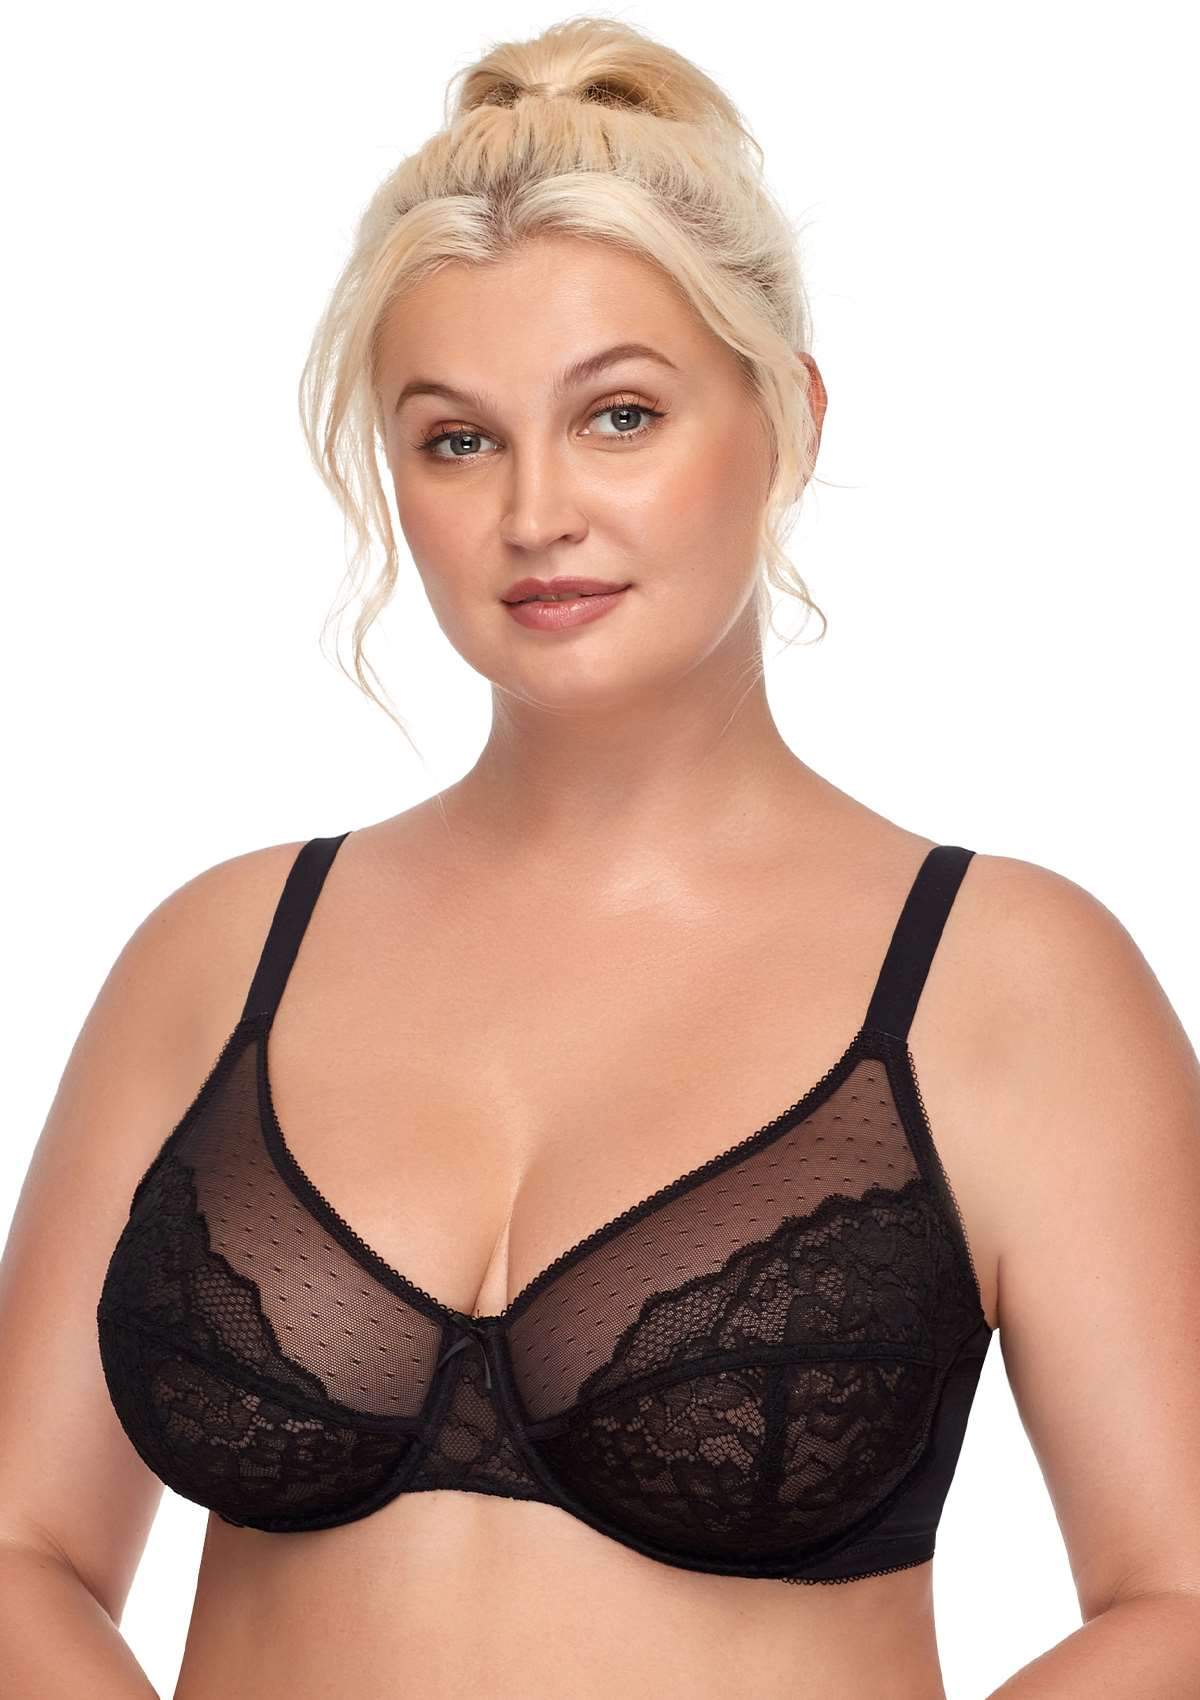 HSIA Enchante Lace Wire Bra For Lifting And Separating Large Breasts - Black / 38 / DD/E